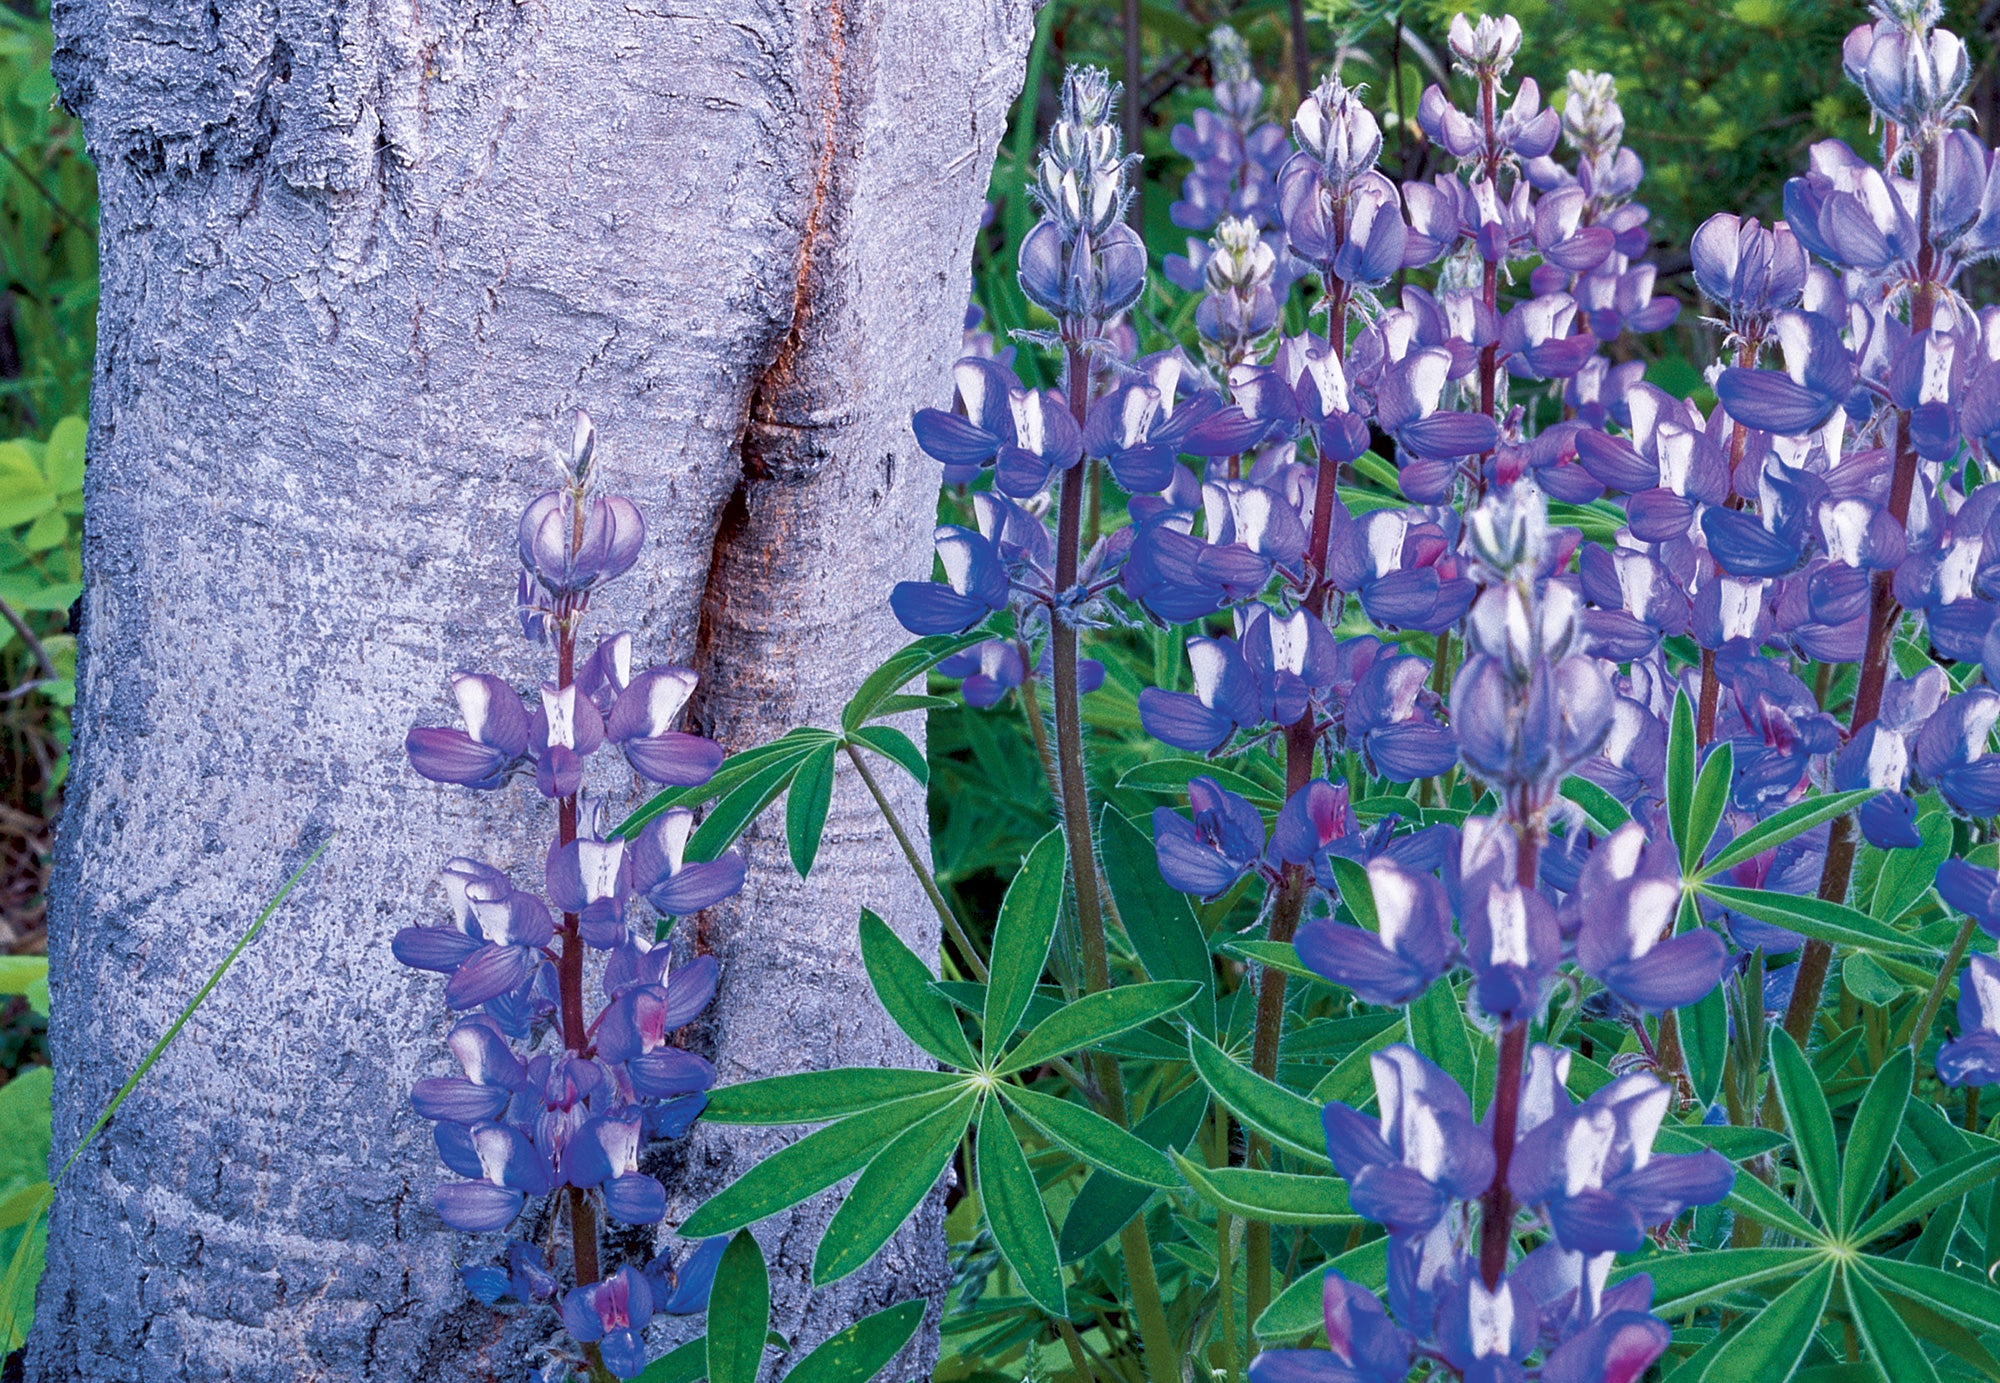 Aspen tree with purple lupin flowers growing next to it. End of image description.